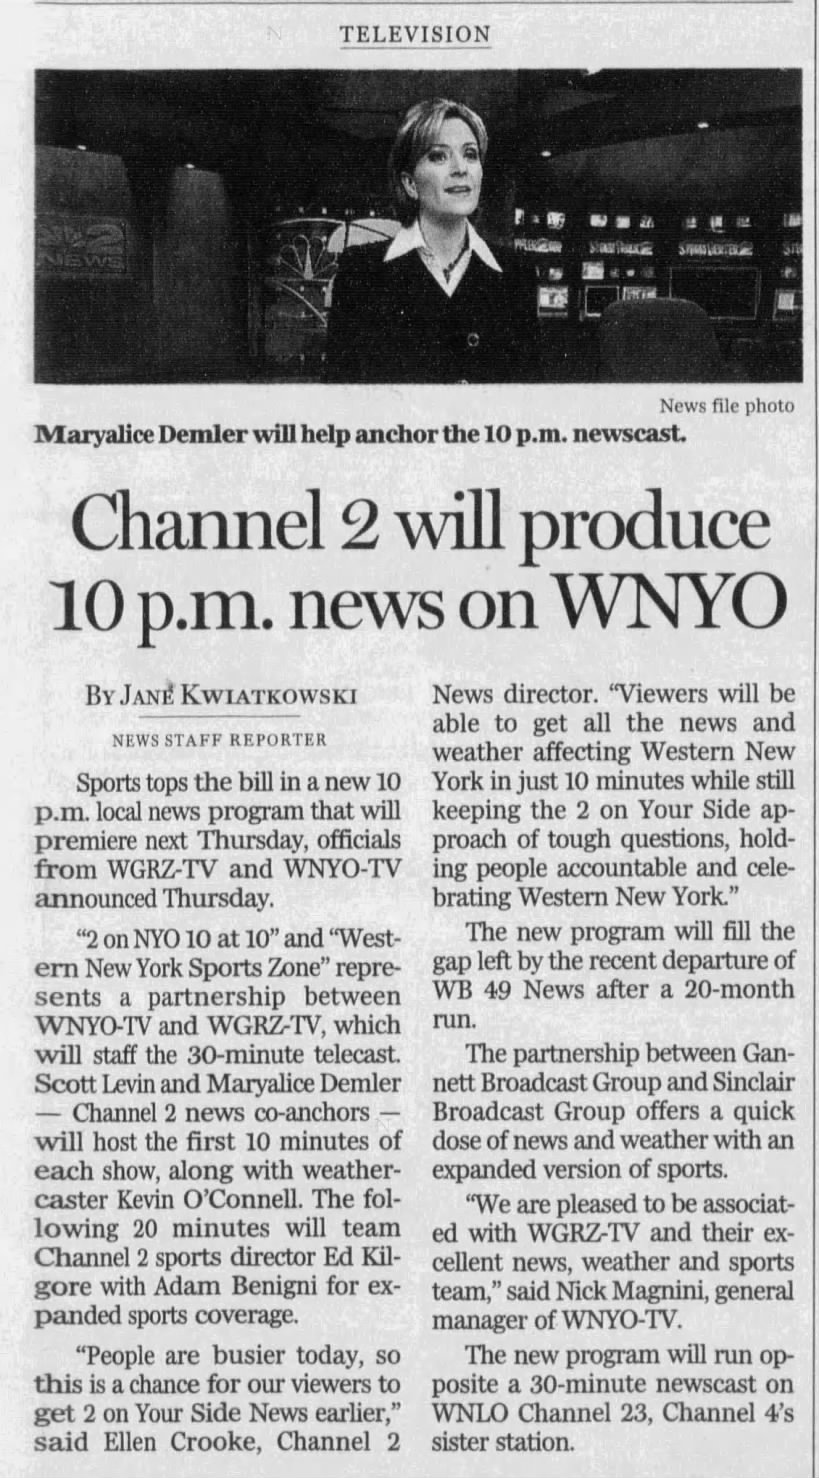 Channel 2 will produce 10 p.m. news on WNYO